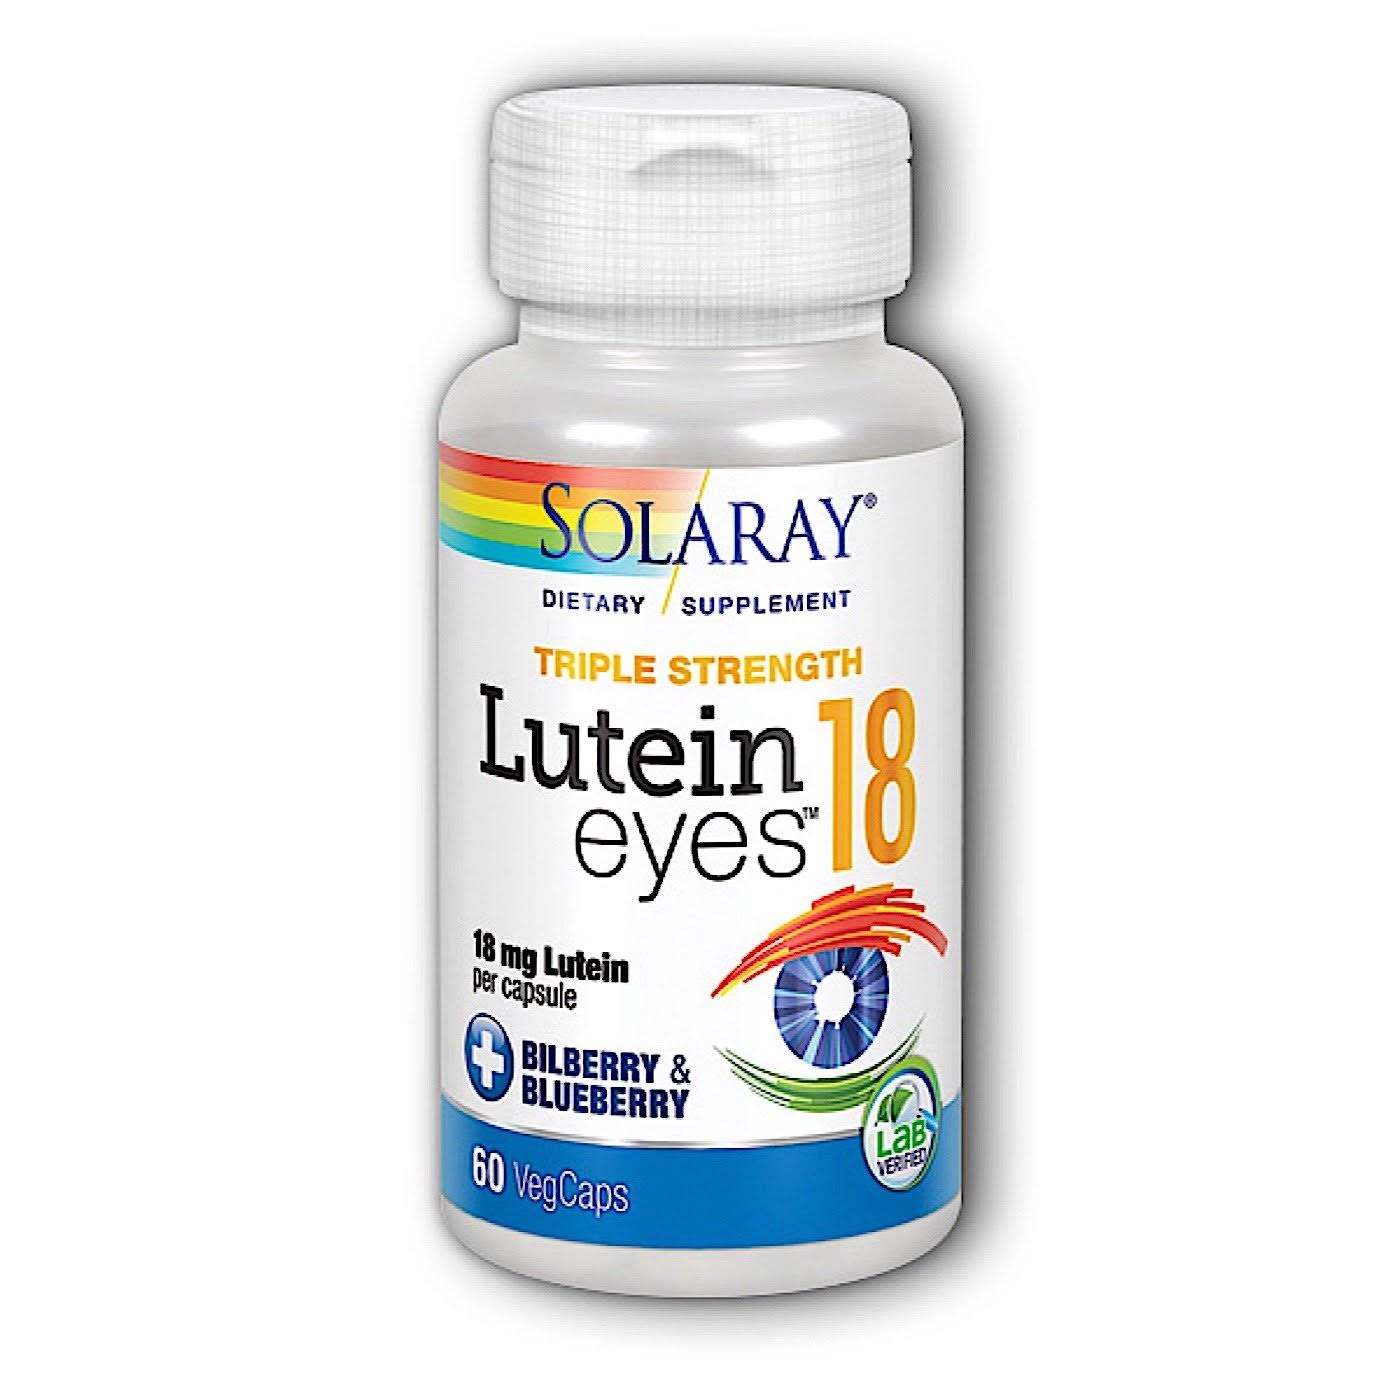 Solaray Lutein Eyes Supplement - 60 Capsules